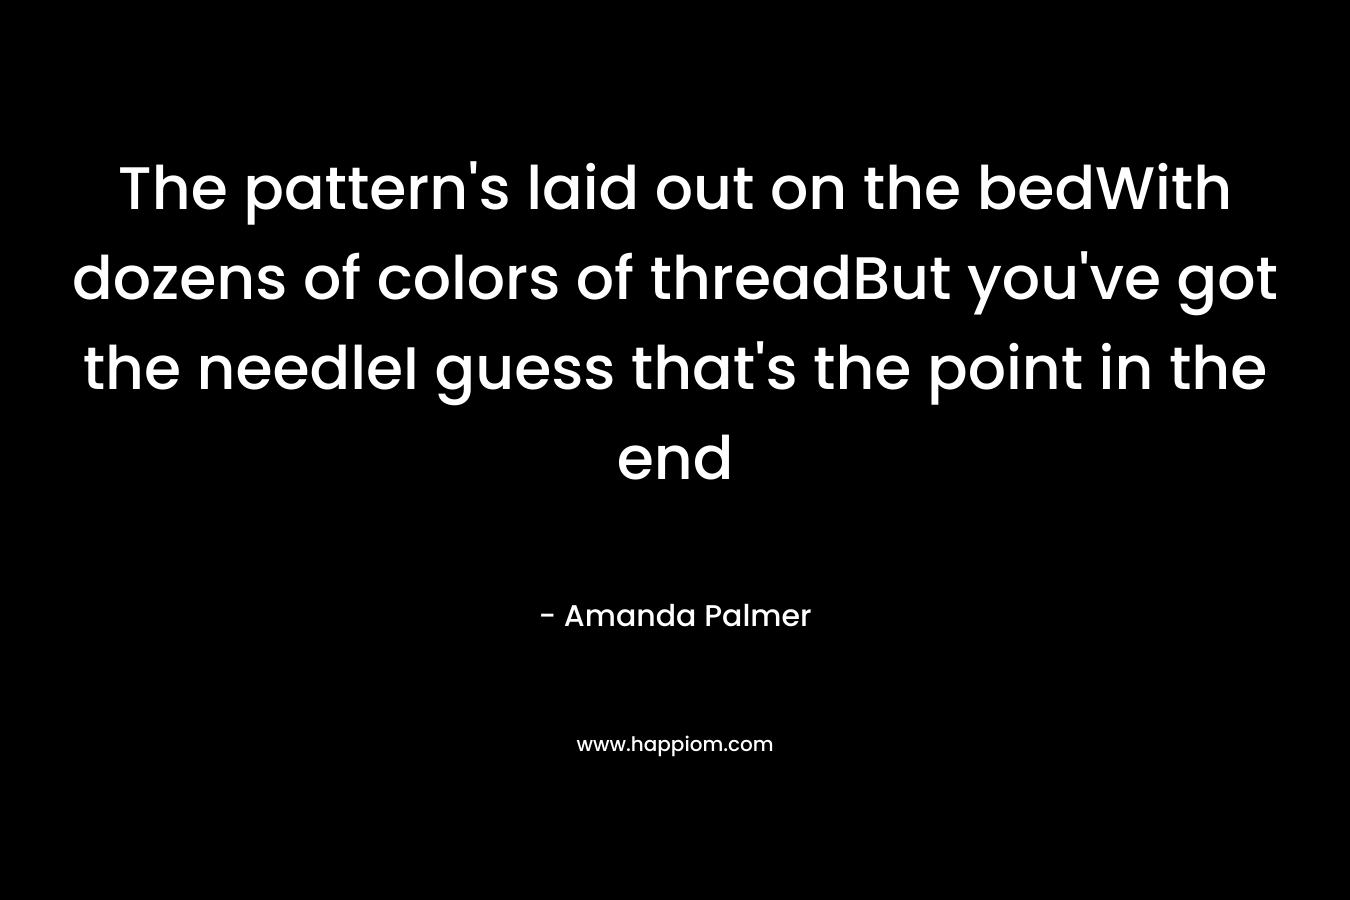 The pattern’s laid out on the bedWith dozens of colors of threadBut you’ve got the needleI guess that’s the point in the end – Amanda Palmer